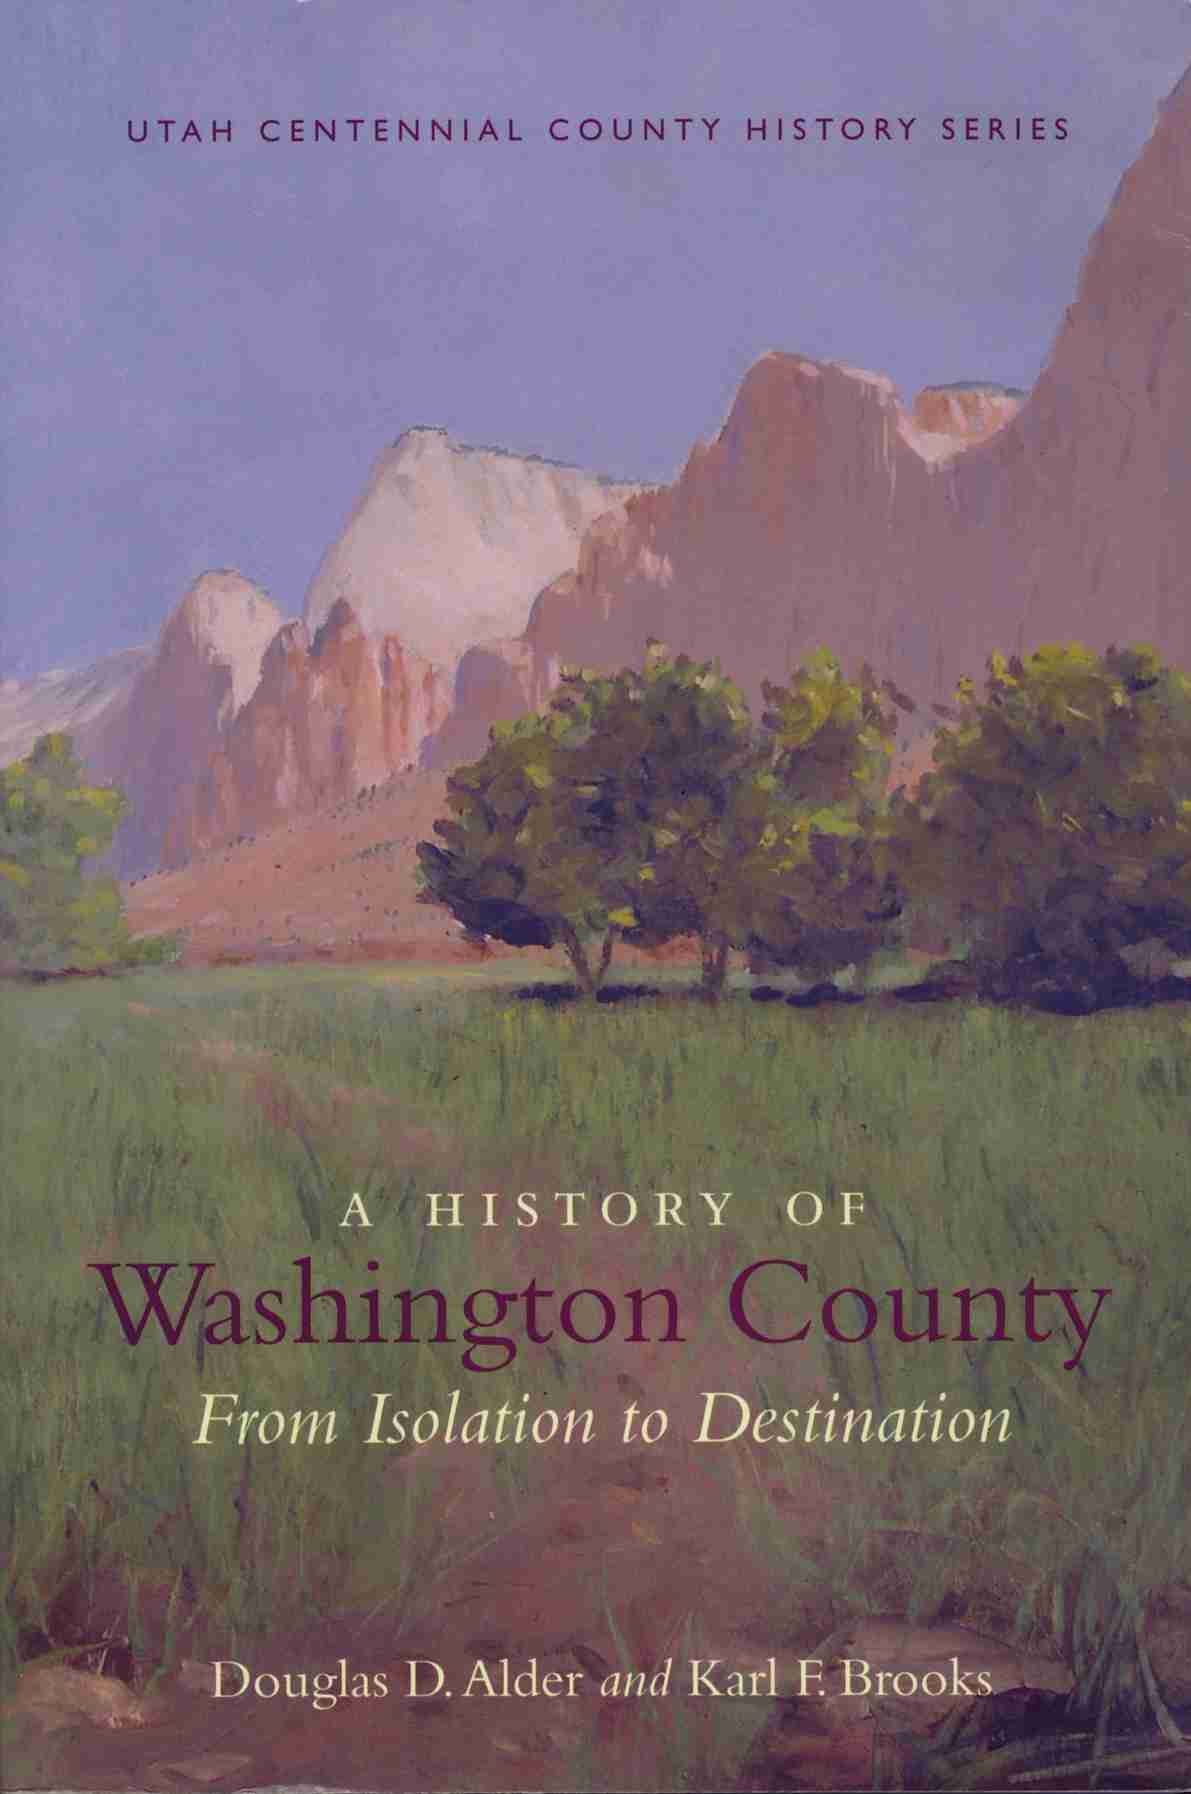 Book: A History of Washington County from Isolation to Destination